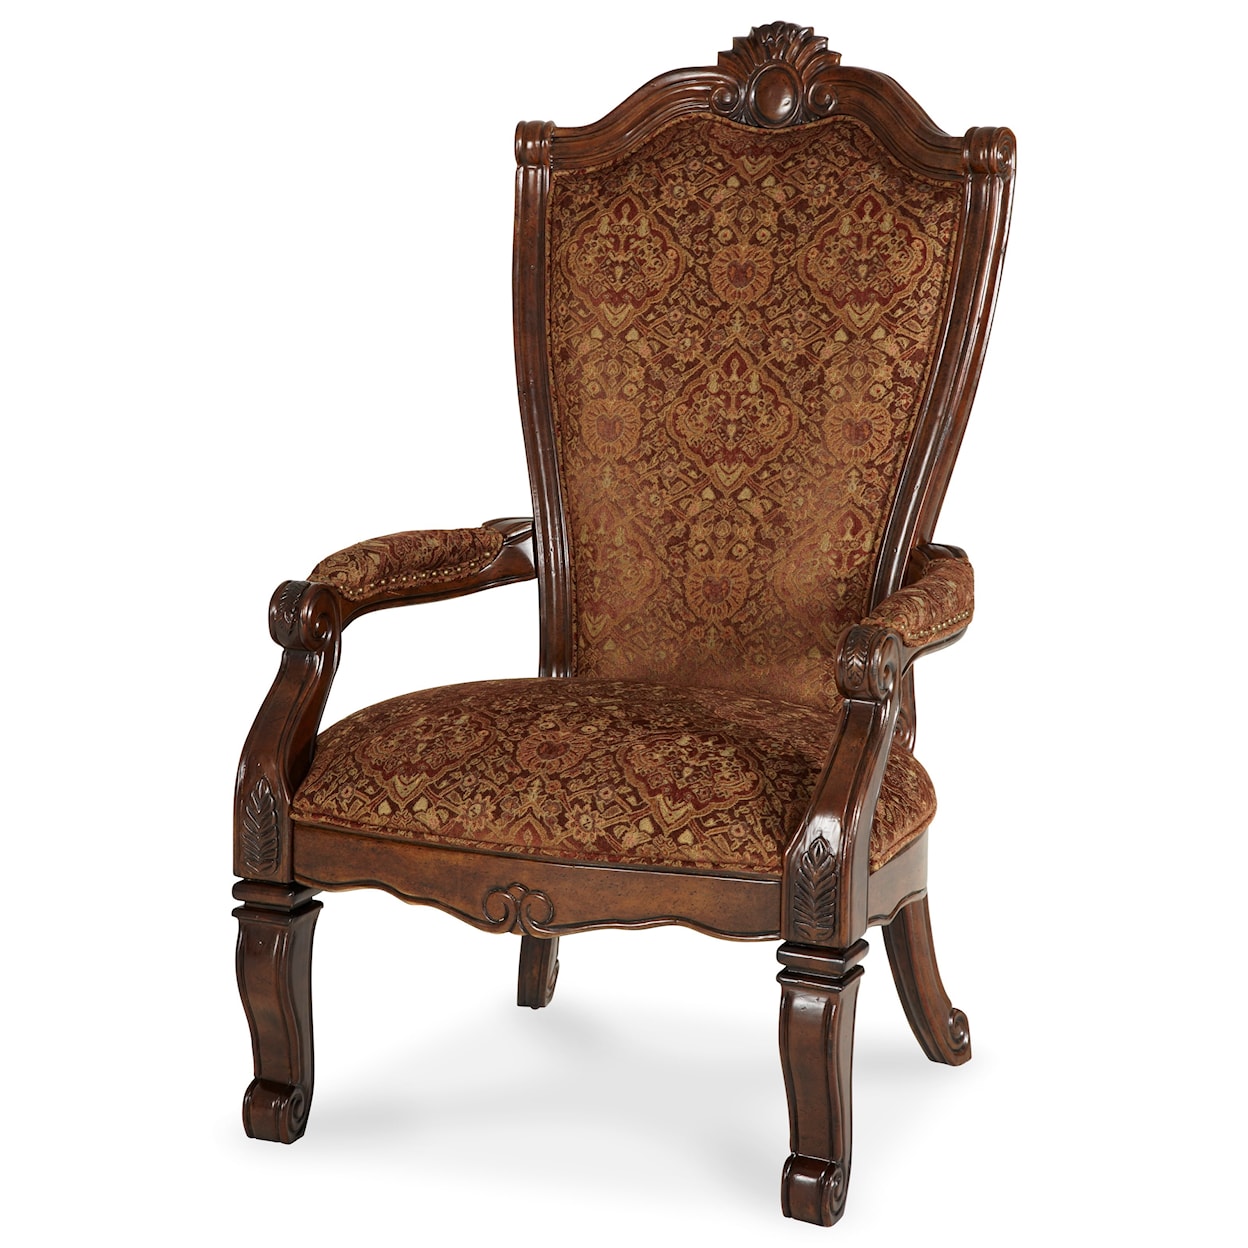 Michael Amini Windsor Court Arm Dining Chair